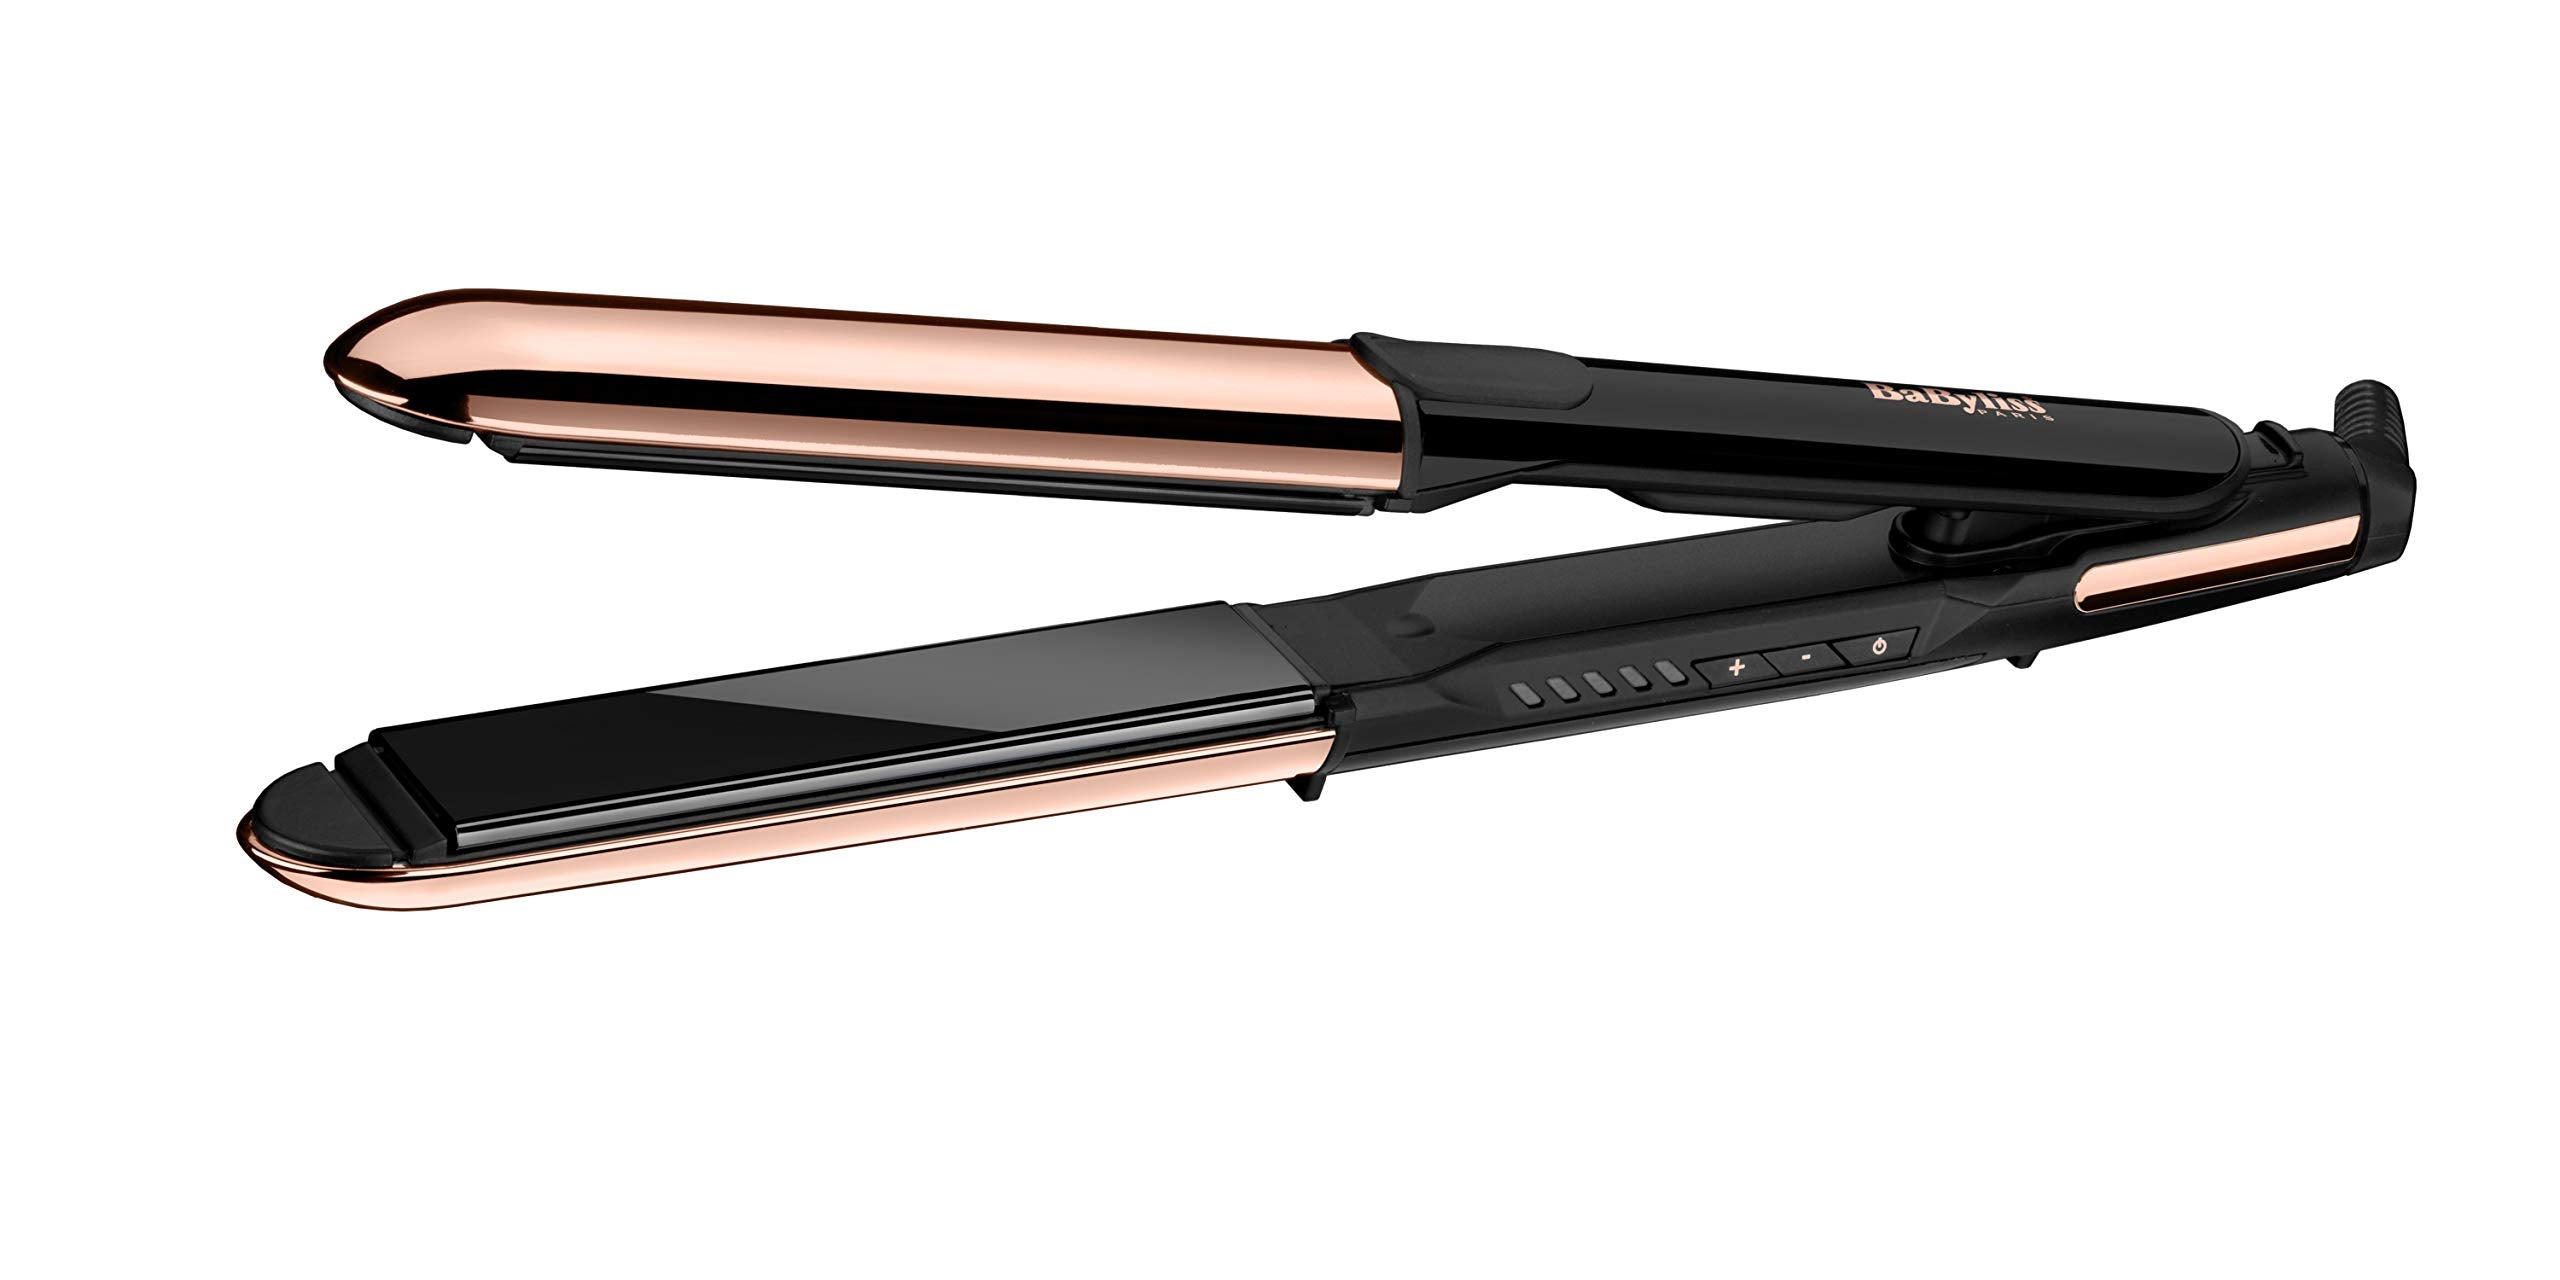 BaByliss Straightener, 28mm Titanium Plates For Efficient Styling, 5 Temperature Settings For Versatility With Fast Heat-up Time, Lightweight And Ergonomic Design With Shiny Results, ST482SDE (Gold)